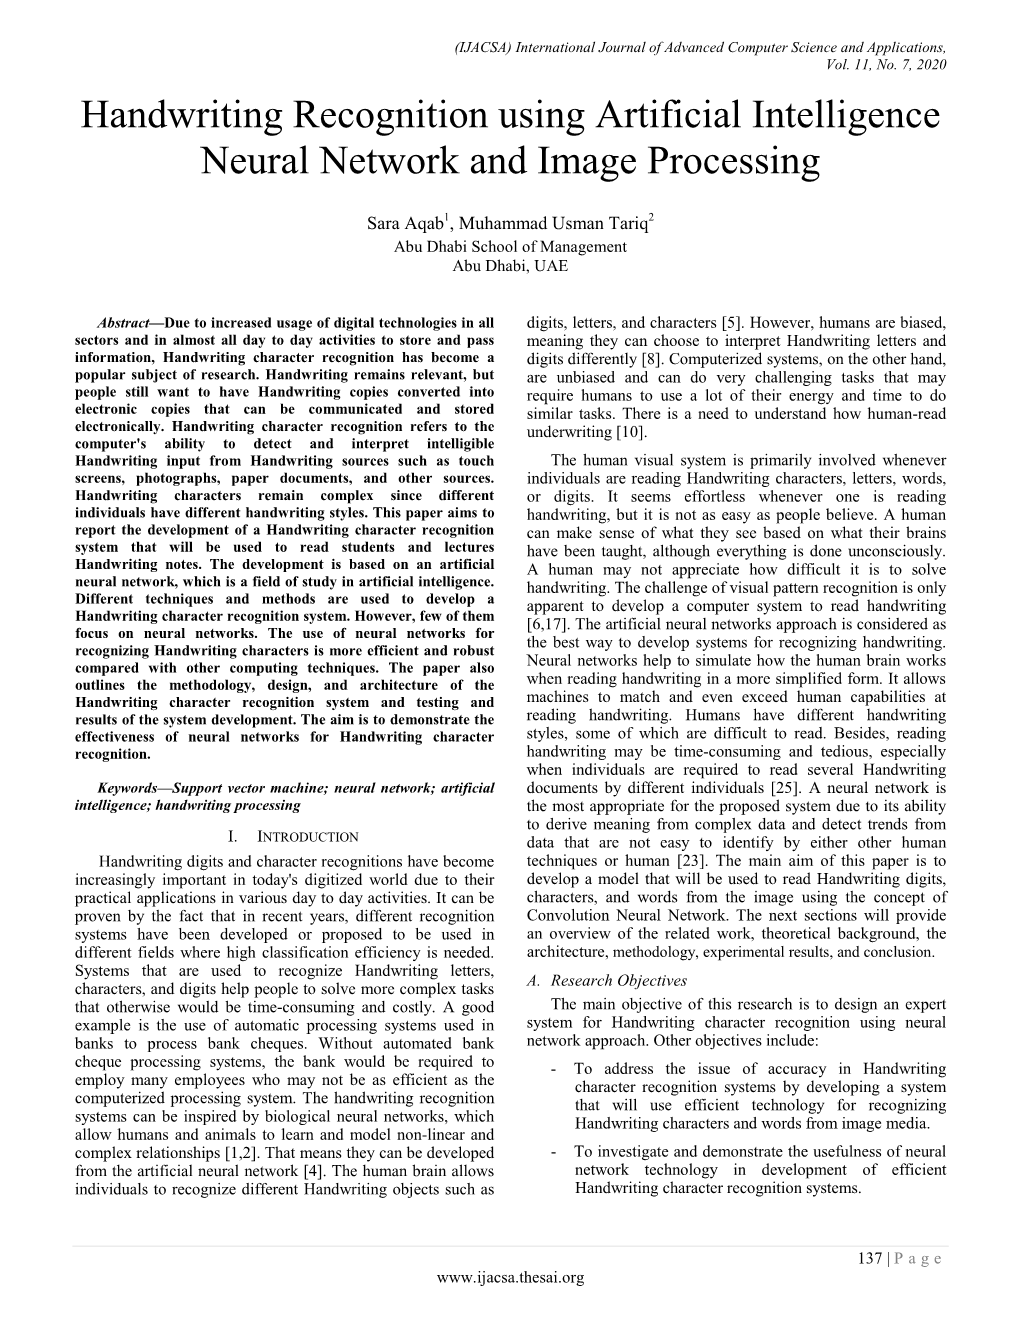 Handwriting Recognition Using Artificial Intelligence Neural Network and Image Processing